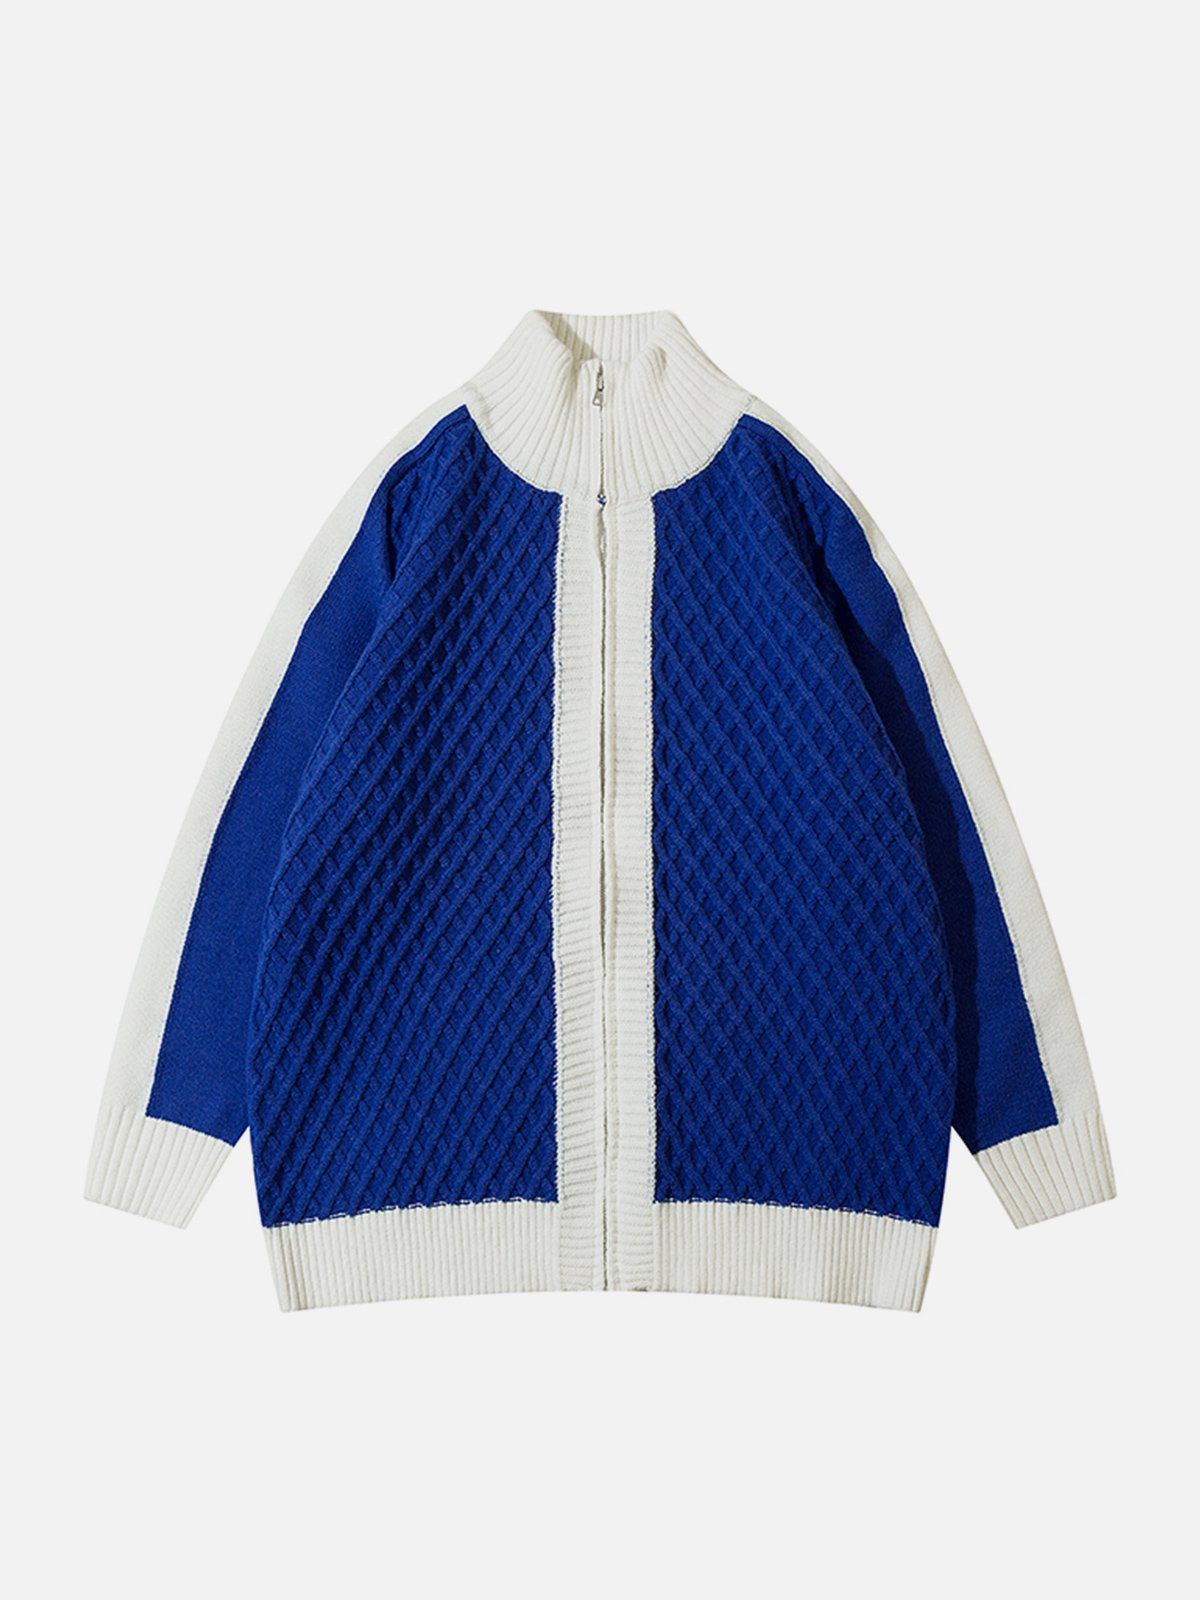 Sneakerland® - Clashing Color Patchwork Cardigan